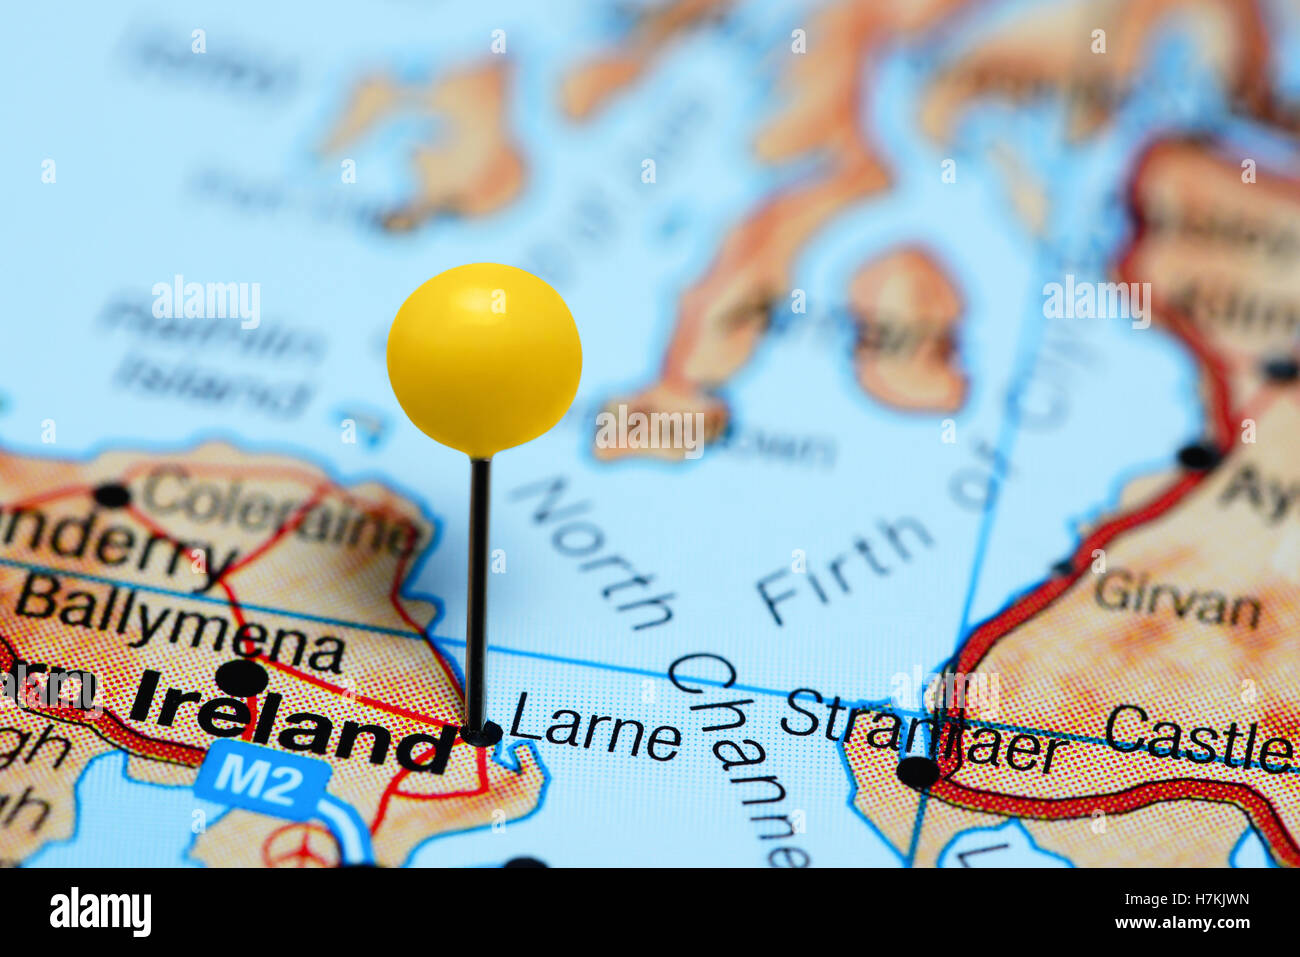 Larne pinned on a map of Northern Ireland Stock Photo